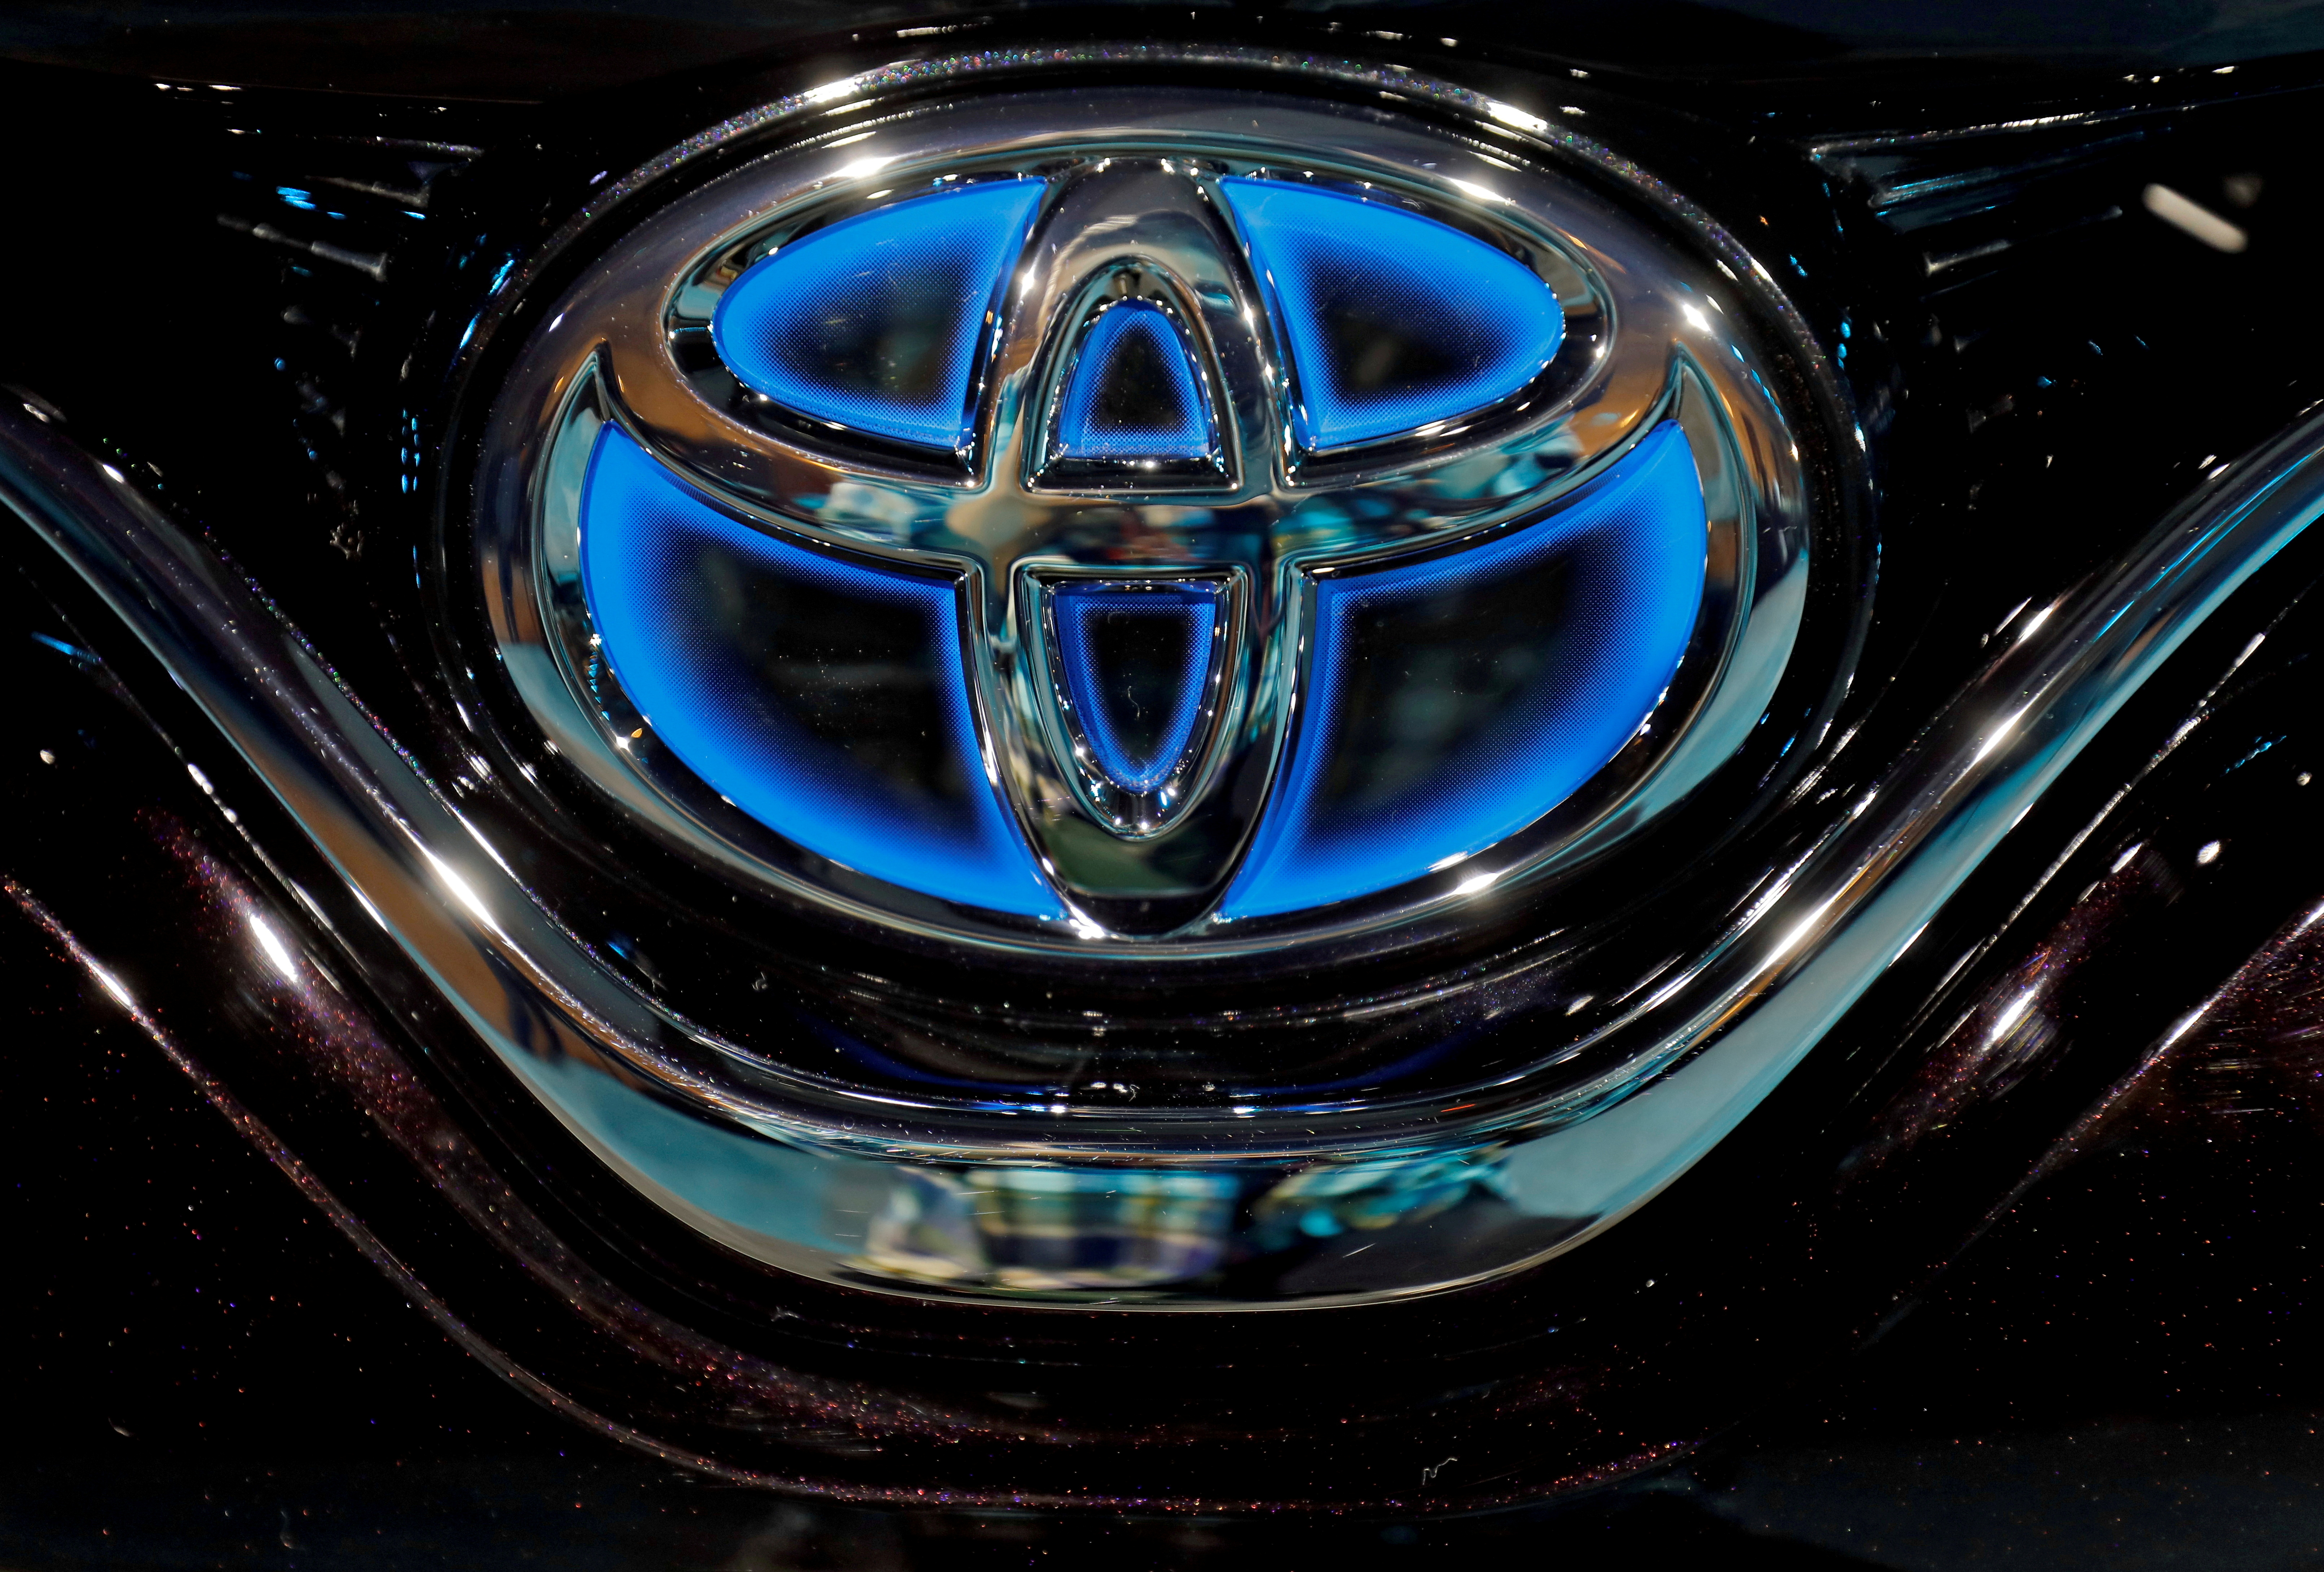 The Toyota logo is seen on the bonnet of a newly launched Camry Hybrid electric vehicle at a hotel in New Delhi, India, January 18, 2019. REUTERS/Anushree Fadnavis